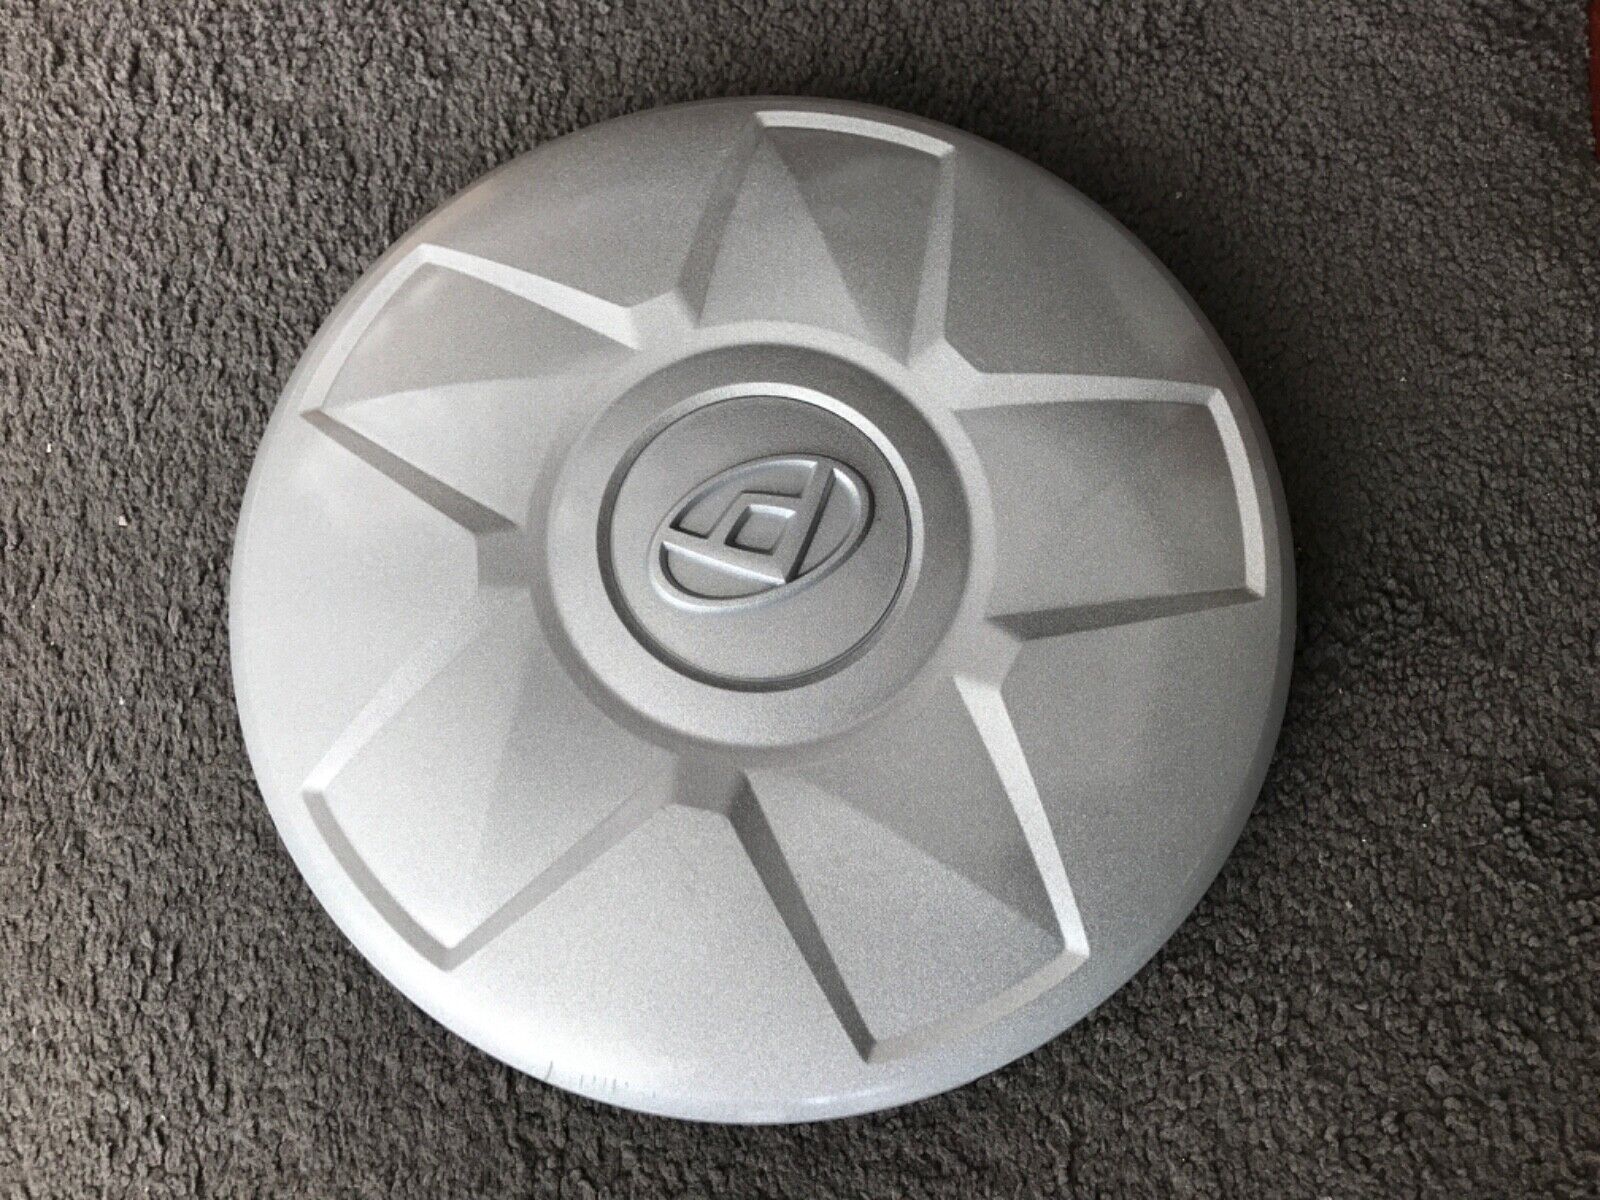 AIRCRAFT WHEEL COVERS AIRPLANE HUBCAPS STANDARD sz For CLEVELAND WHEEL 6.00X6